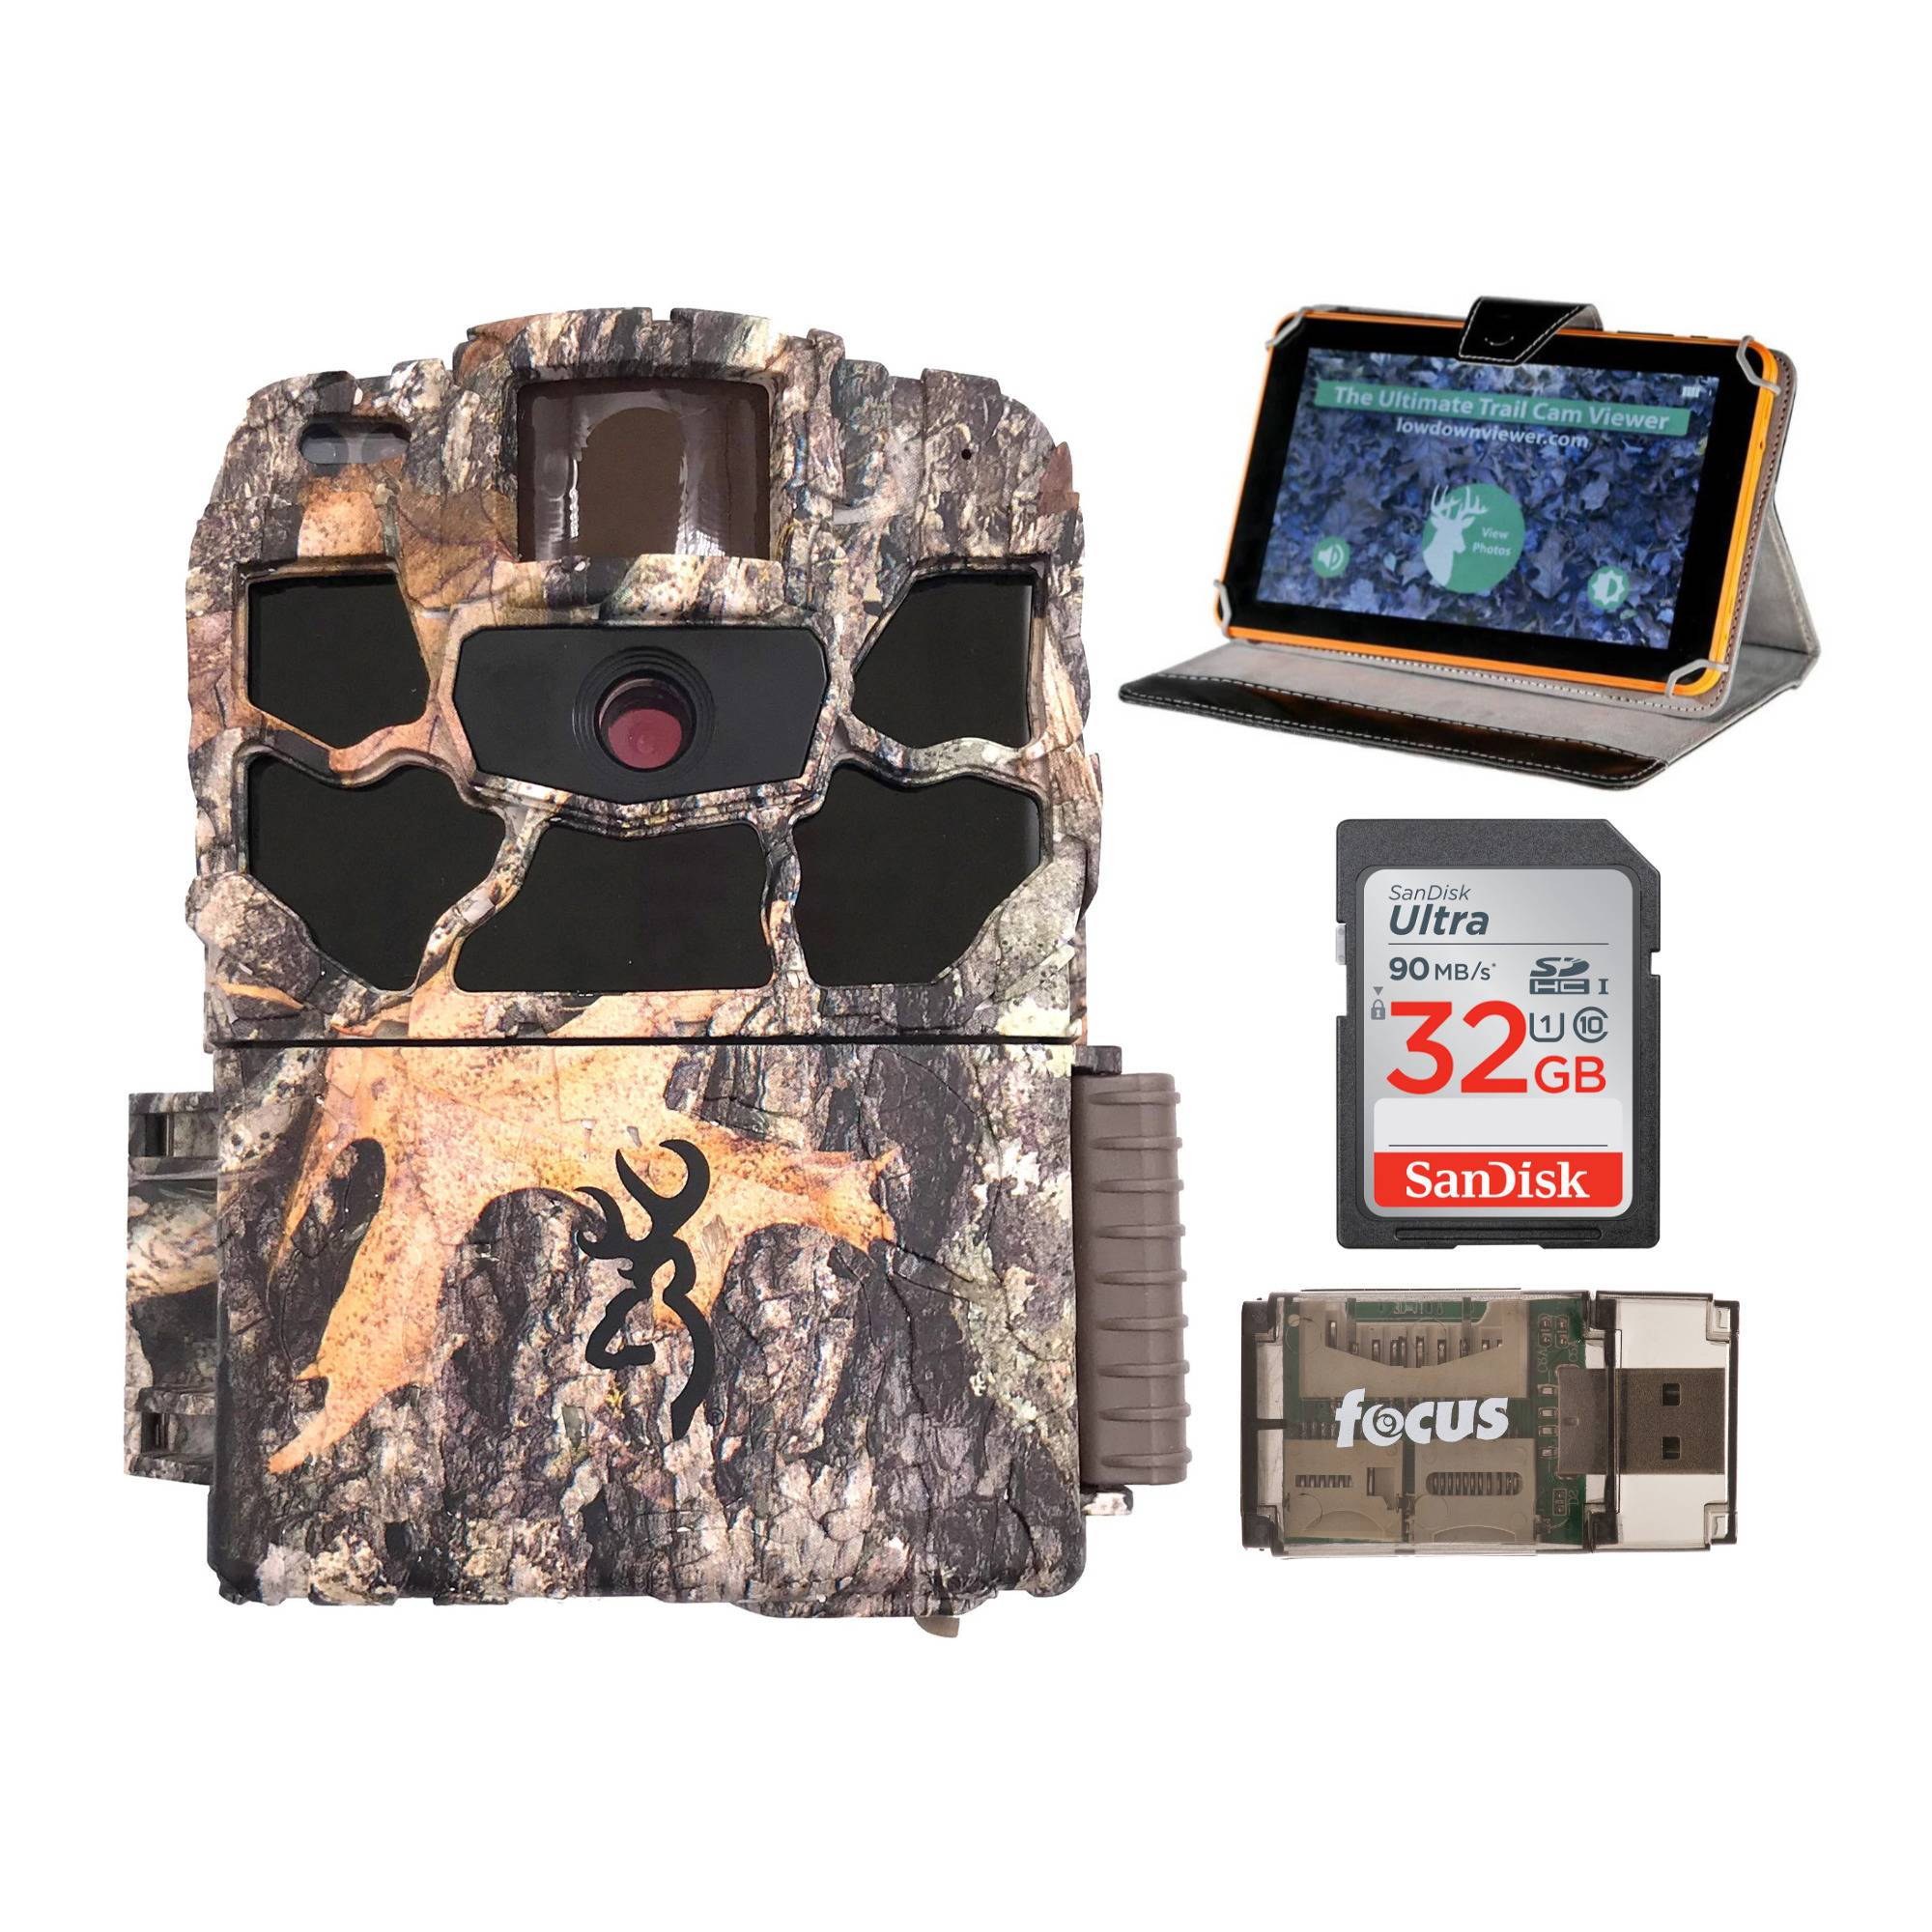 Browning Trail Cameras Dark Ops Max HD Plus 20MP Trail Camera with Image and Video Viewer, 32GB SD Card and Reader